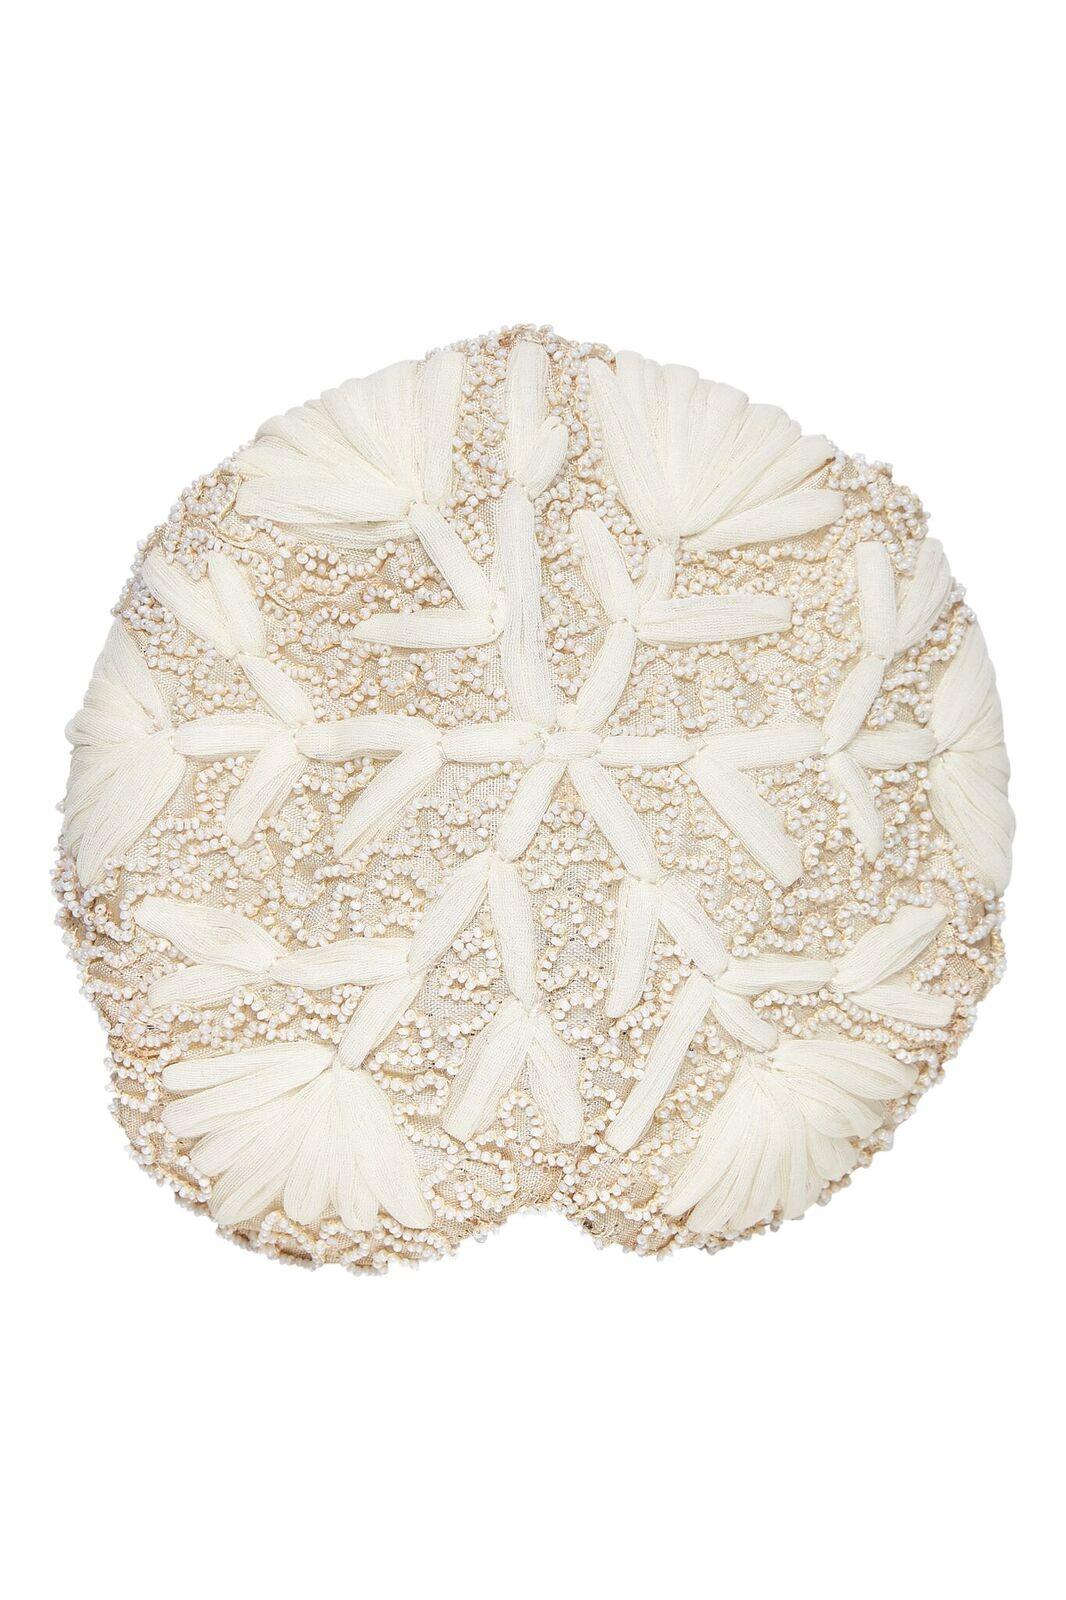 This enchanting 1950s ivory bridal cap is beautifully constructed and labeled Ja -Lee of New York. The soft ivory silk overlay is embroidered with a soft mesh thread in a paler tone to create the shape of a snowflake which covers the entirety of the